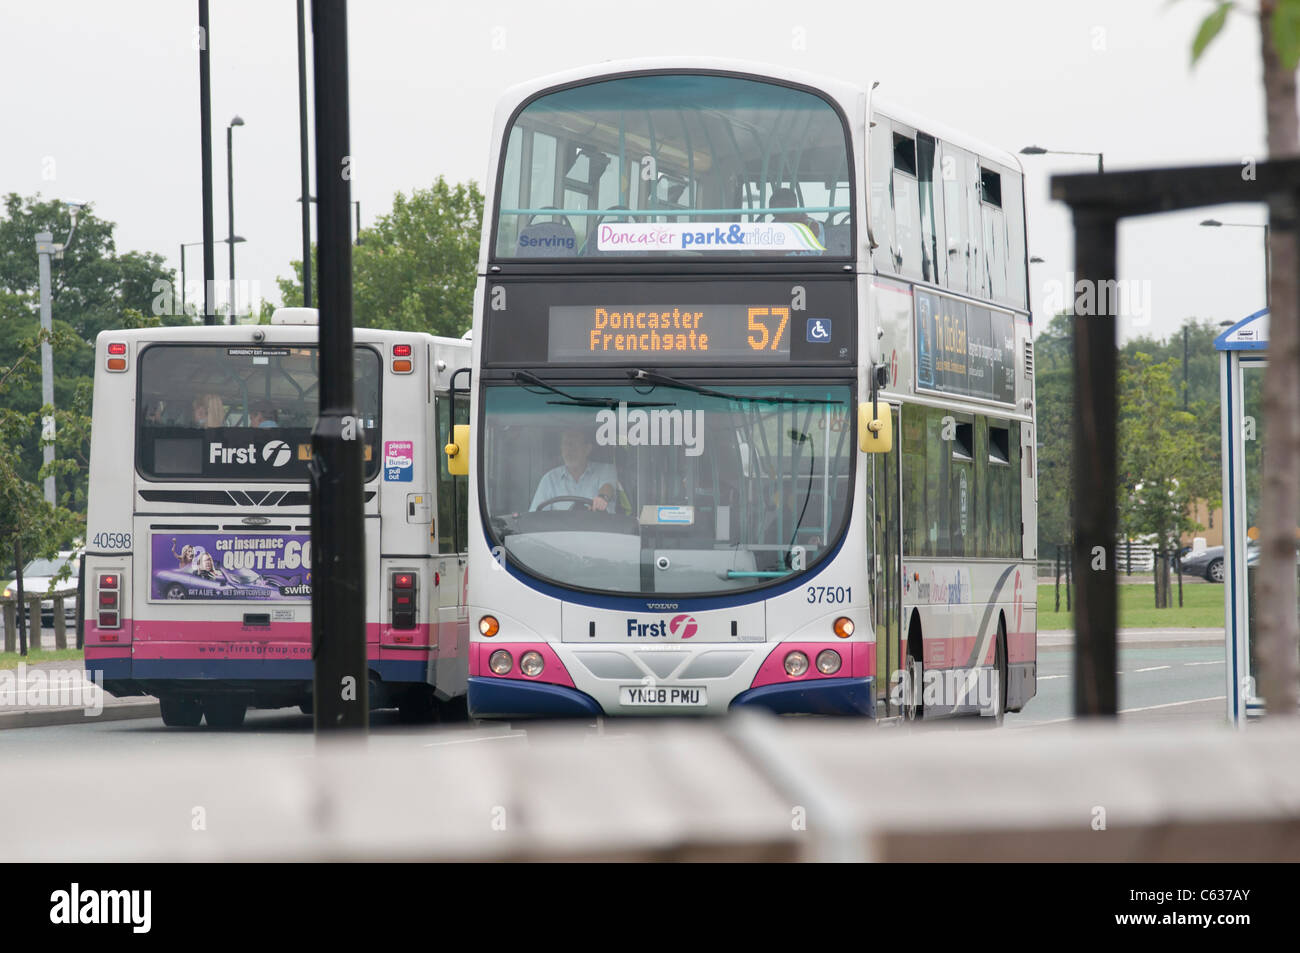 First bus at a bus stop on Bawtry Road in Doncaster, Yorkshire Stock Photo